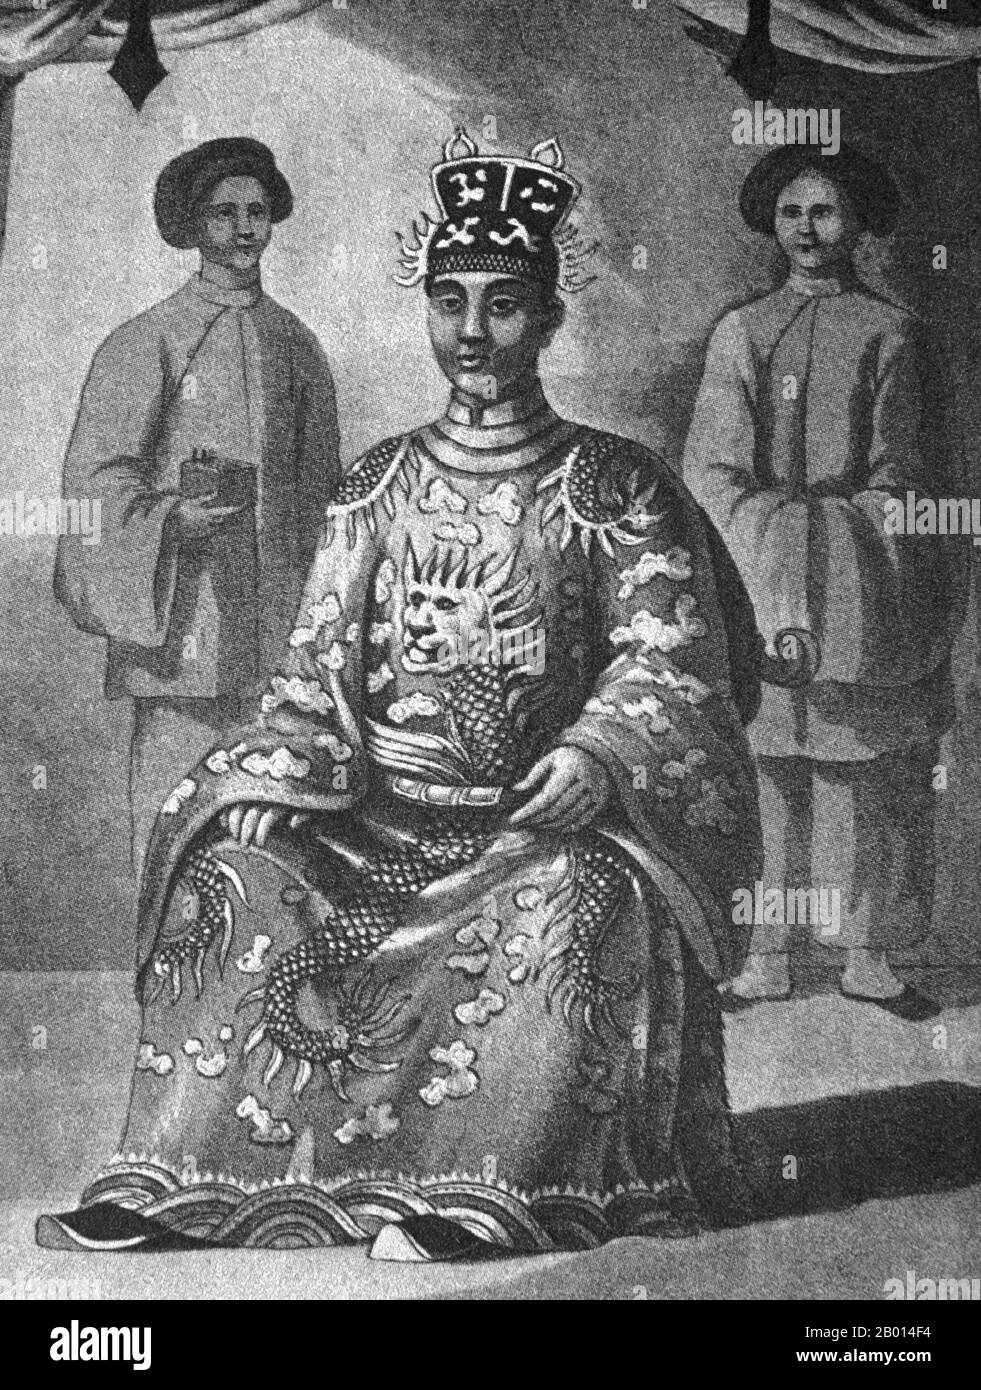 Vietnam: Emperor Minh Mang (1791-1841), 2nd emperor of the Nguyen Dynasty. Engraving by John Crawfurd (1783-1868), 2 January 1828.  Minh Mạng, born Nguyen Phuc Dam, was the second emperor of the Nguyen Dynasty of Vietnam, reigning from 14 February 1820 until 20 January 1841. He was a younger son of Emperor Gia Long, whose eldest son, Crown Prince Canh, had died in 1801.  Minh Mang was a classicist who was regarded as one of Vietnam's most scholarly monarchs. He was known as a poet and was regarded as an emperor who cared sincerely about his country and paid great attention to its rule. Stock Photo